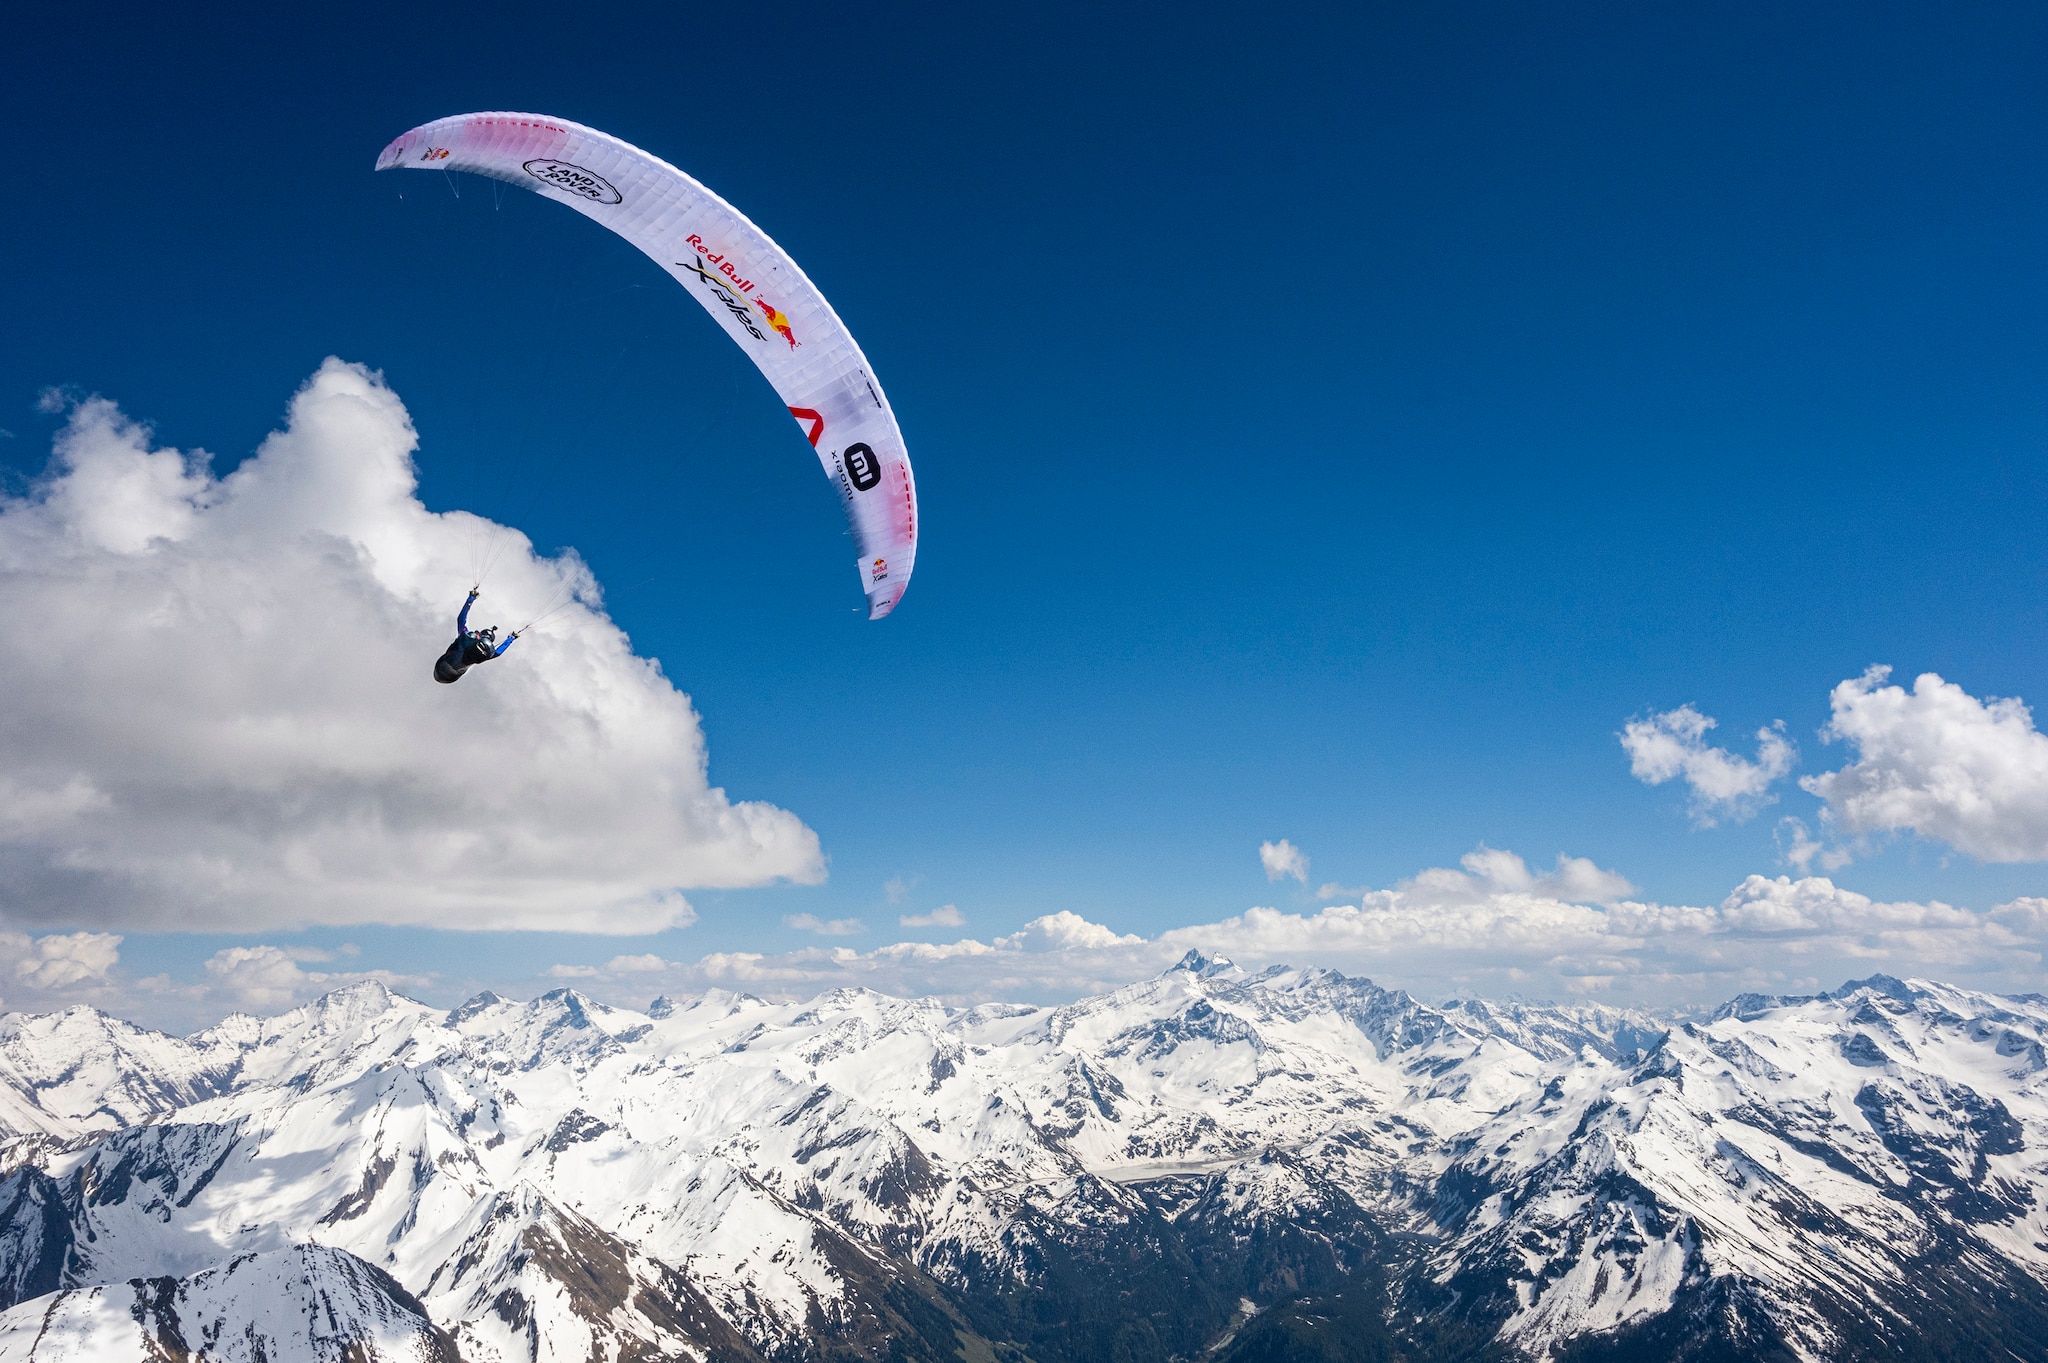 Participant flies during the Red Bull X-Alps preparations in Zell am See, Austria on June 03, 2021